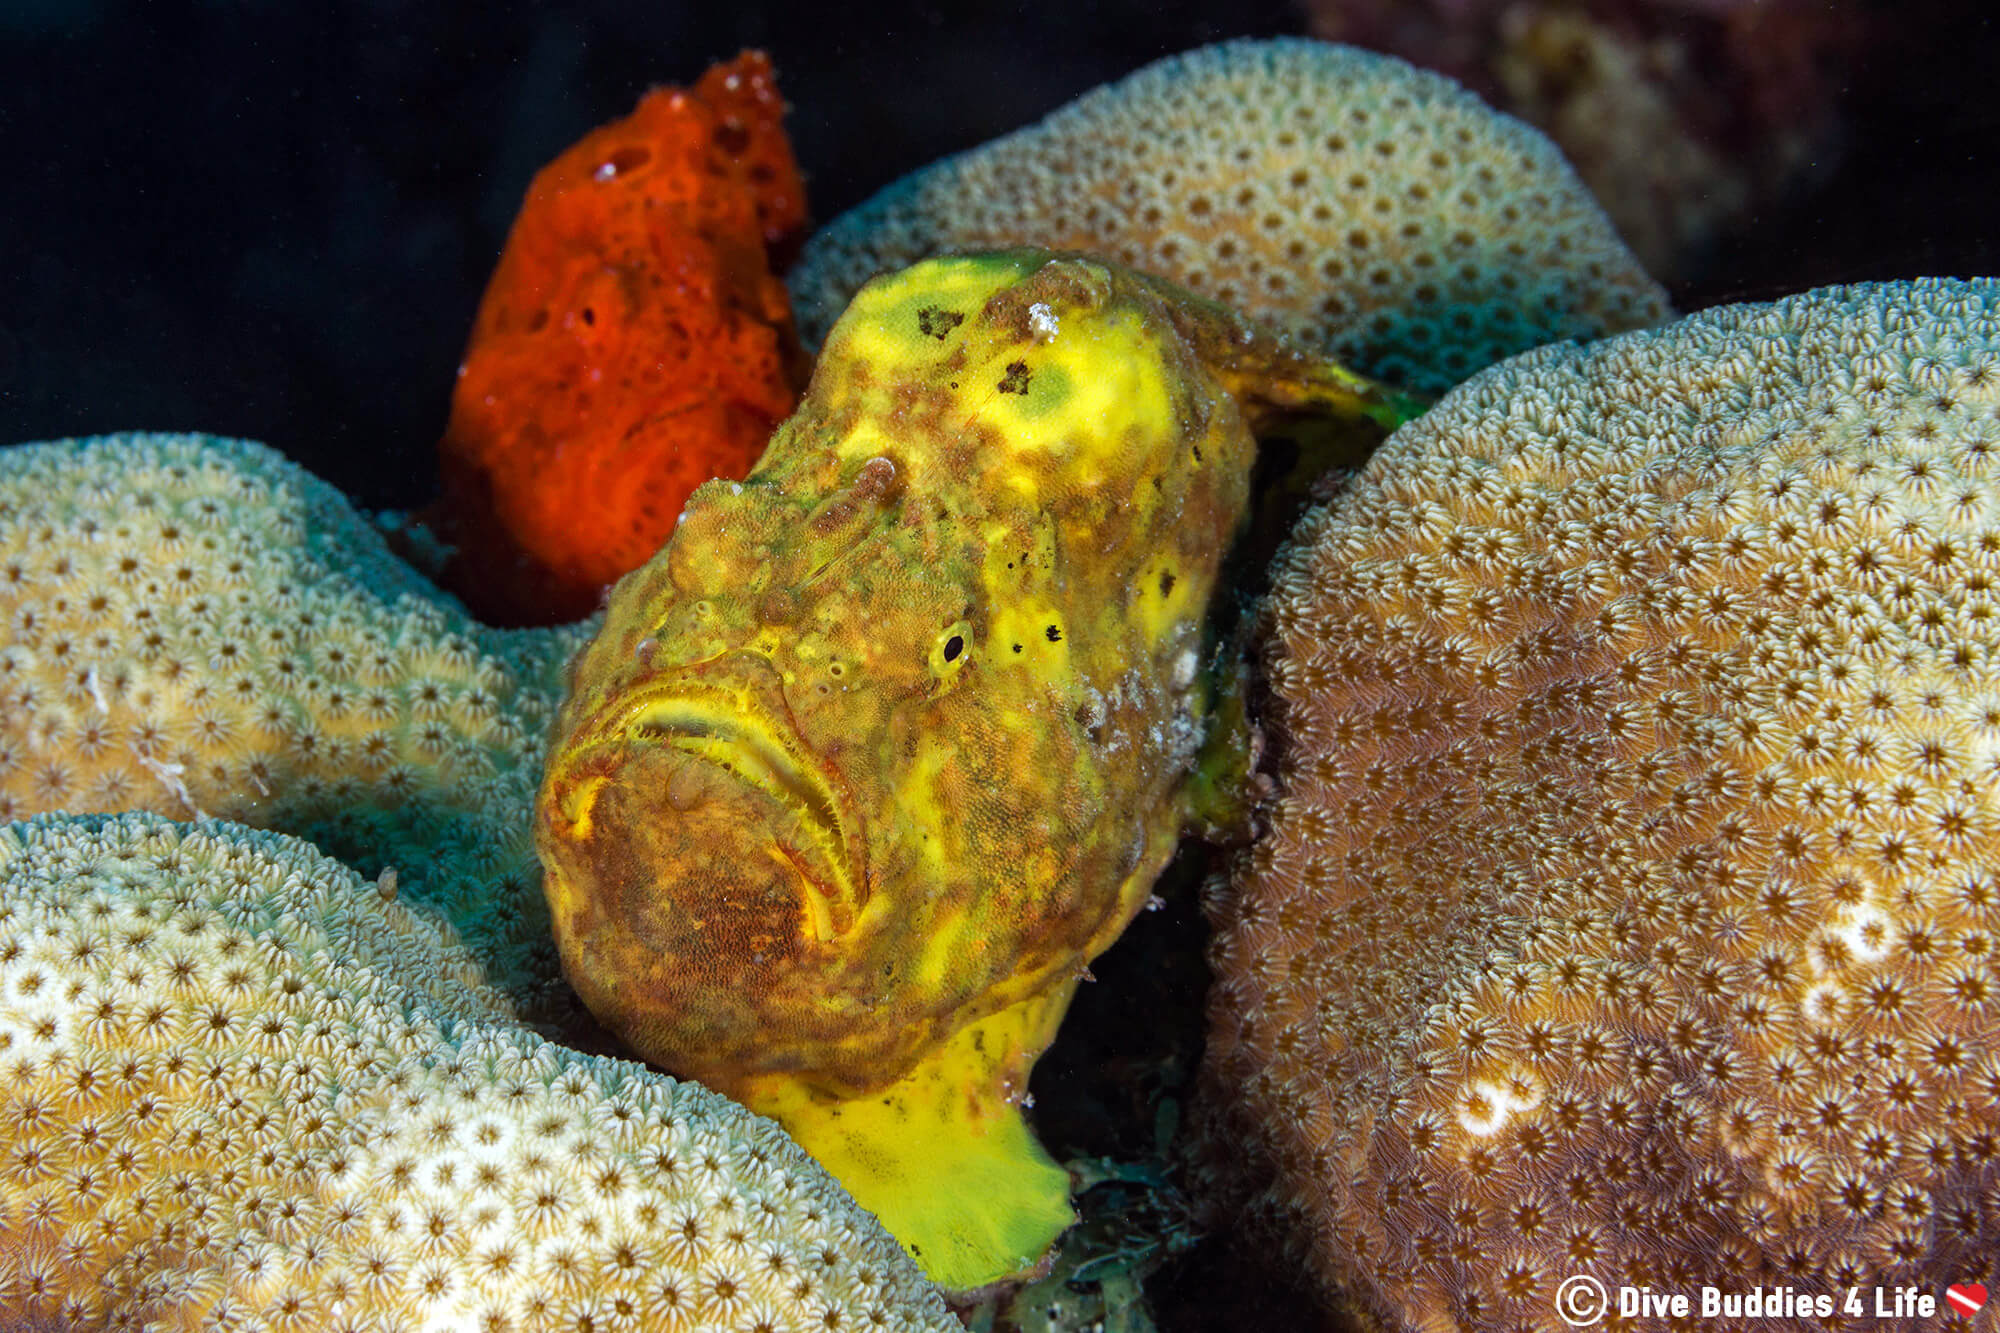 Two Frogfish At A Scuba Diving Site On The Caribbean Island Of Bonaire, Netherlands